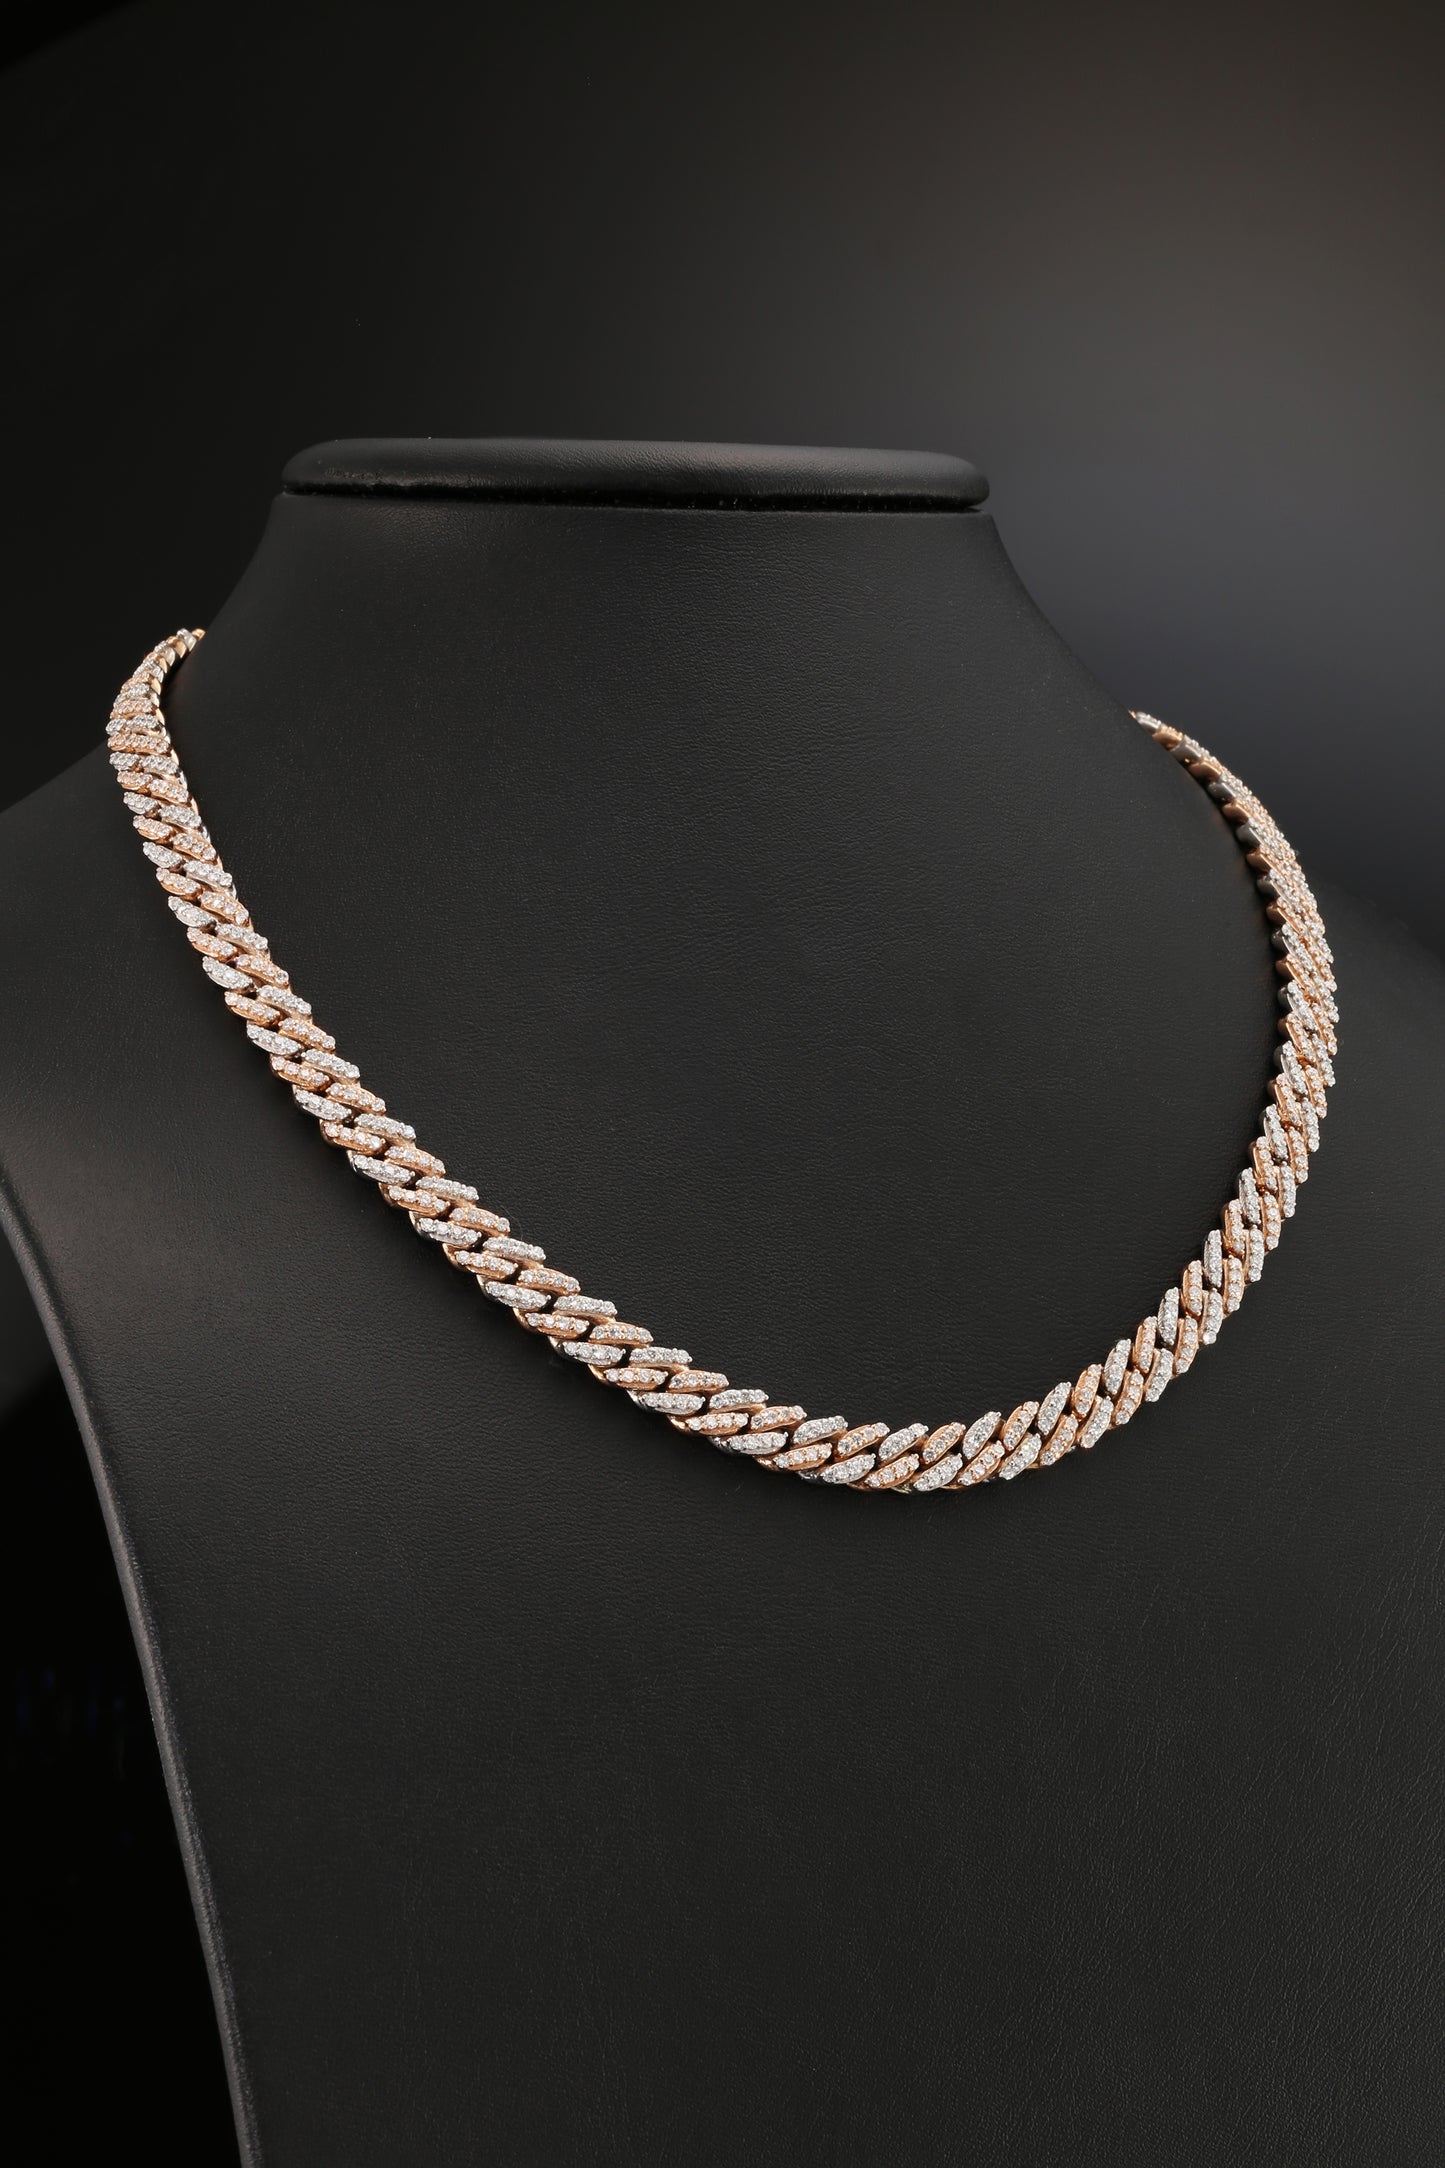 14K White and Rose Gold Two Tone Diamond Chain Necklace, 18"